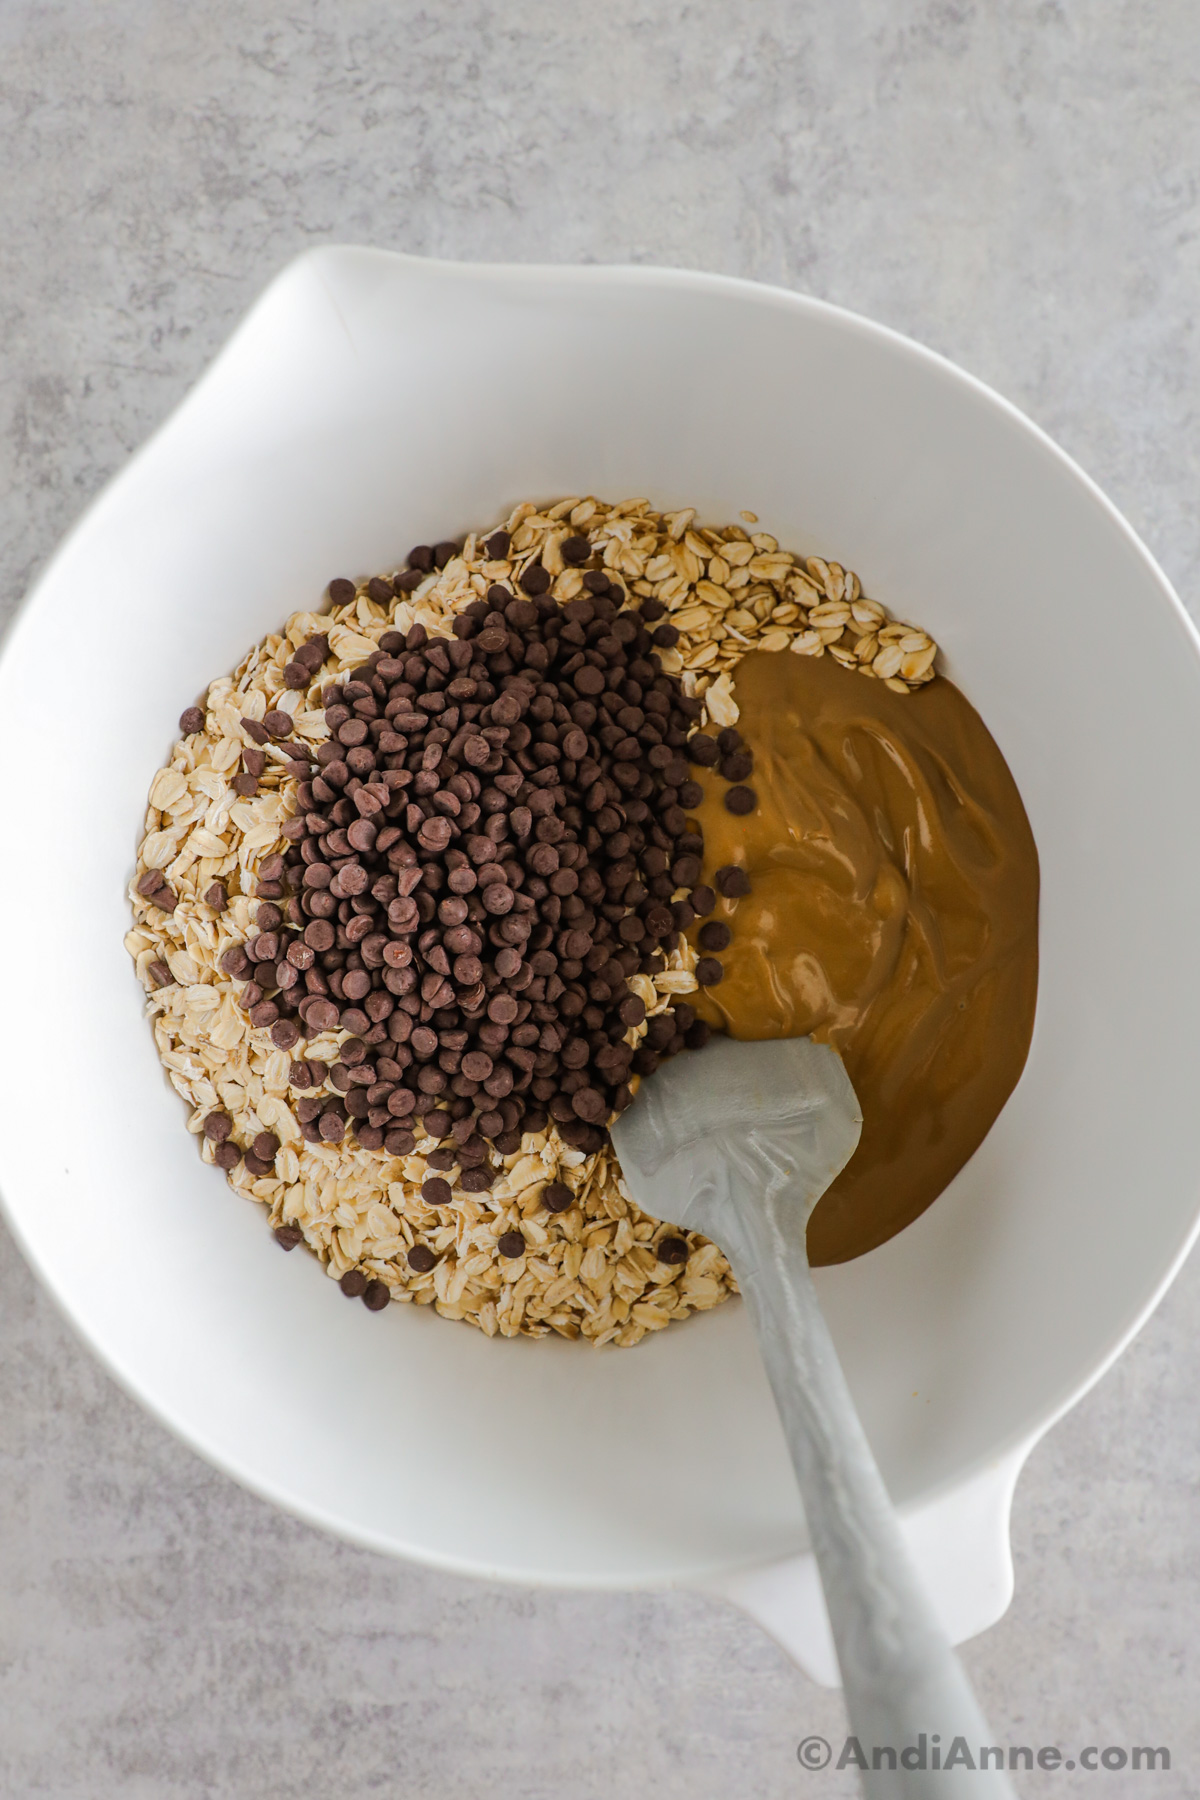 A bowl with rolled oats, peanut butter and chocolate chips inside.